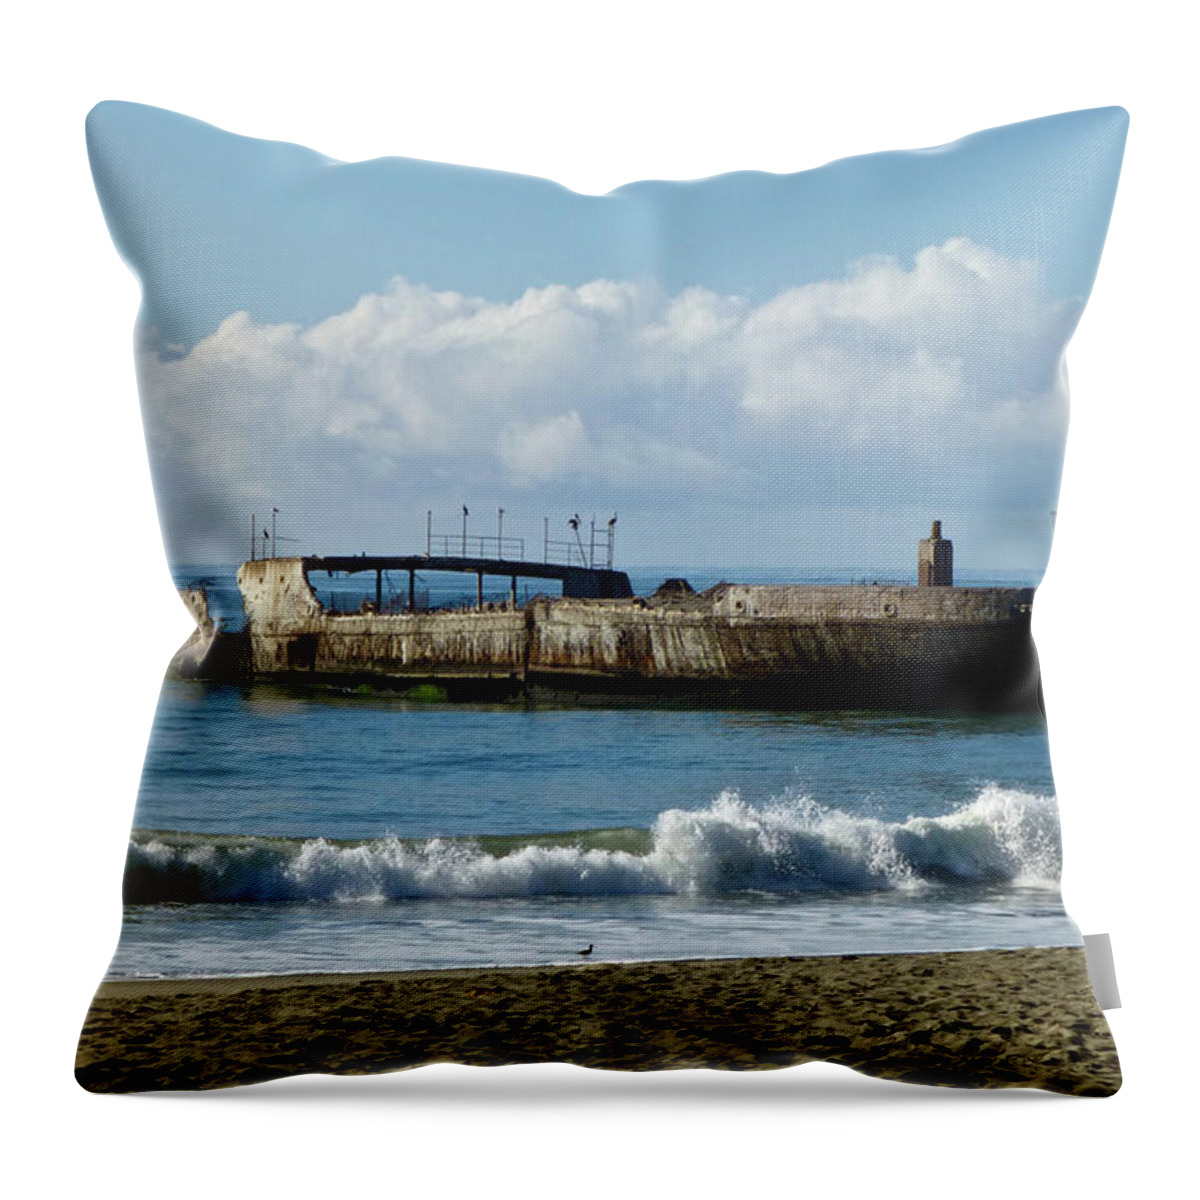 Cement Ship Throw Pillow featuring the photograph Cement Ship Seacliff Beach by Amelia Racca